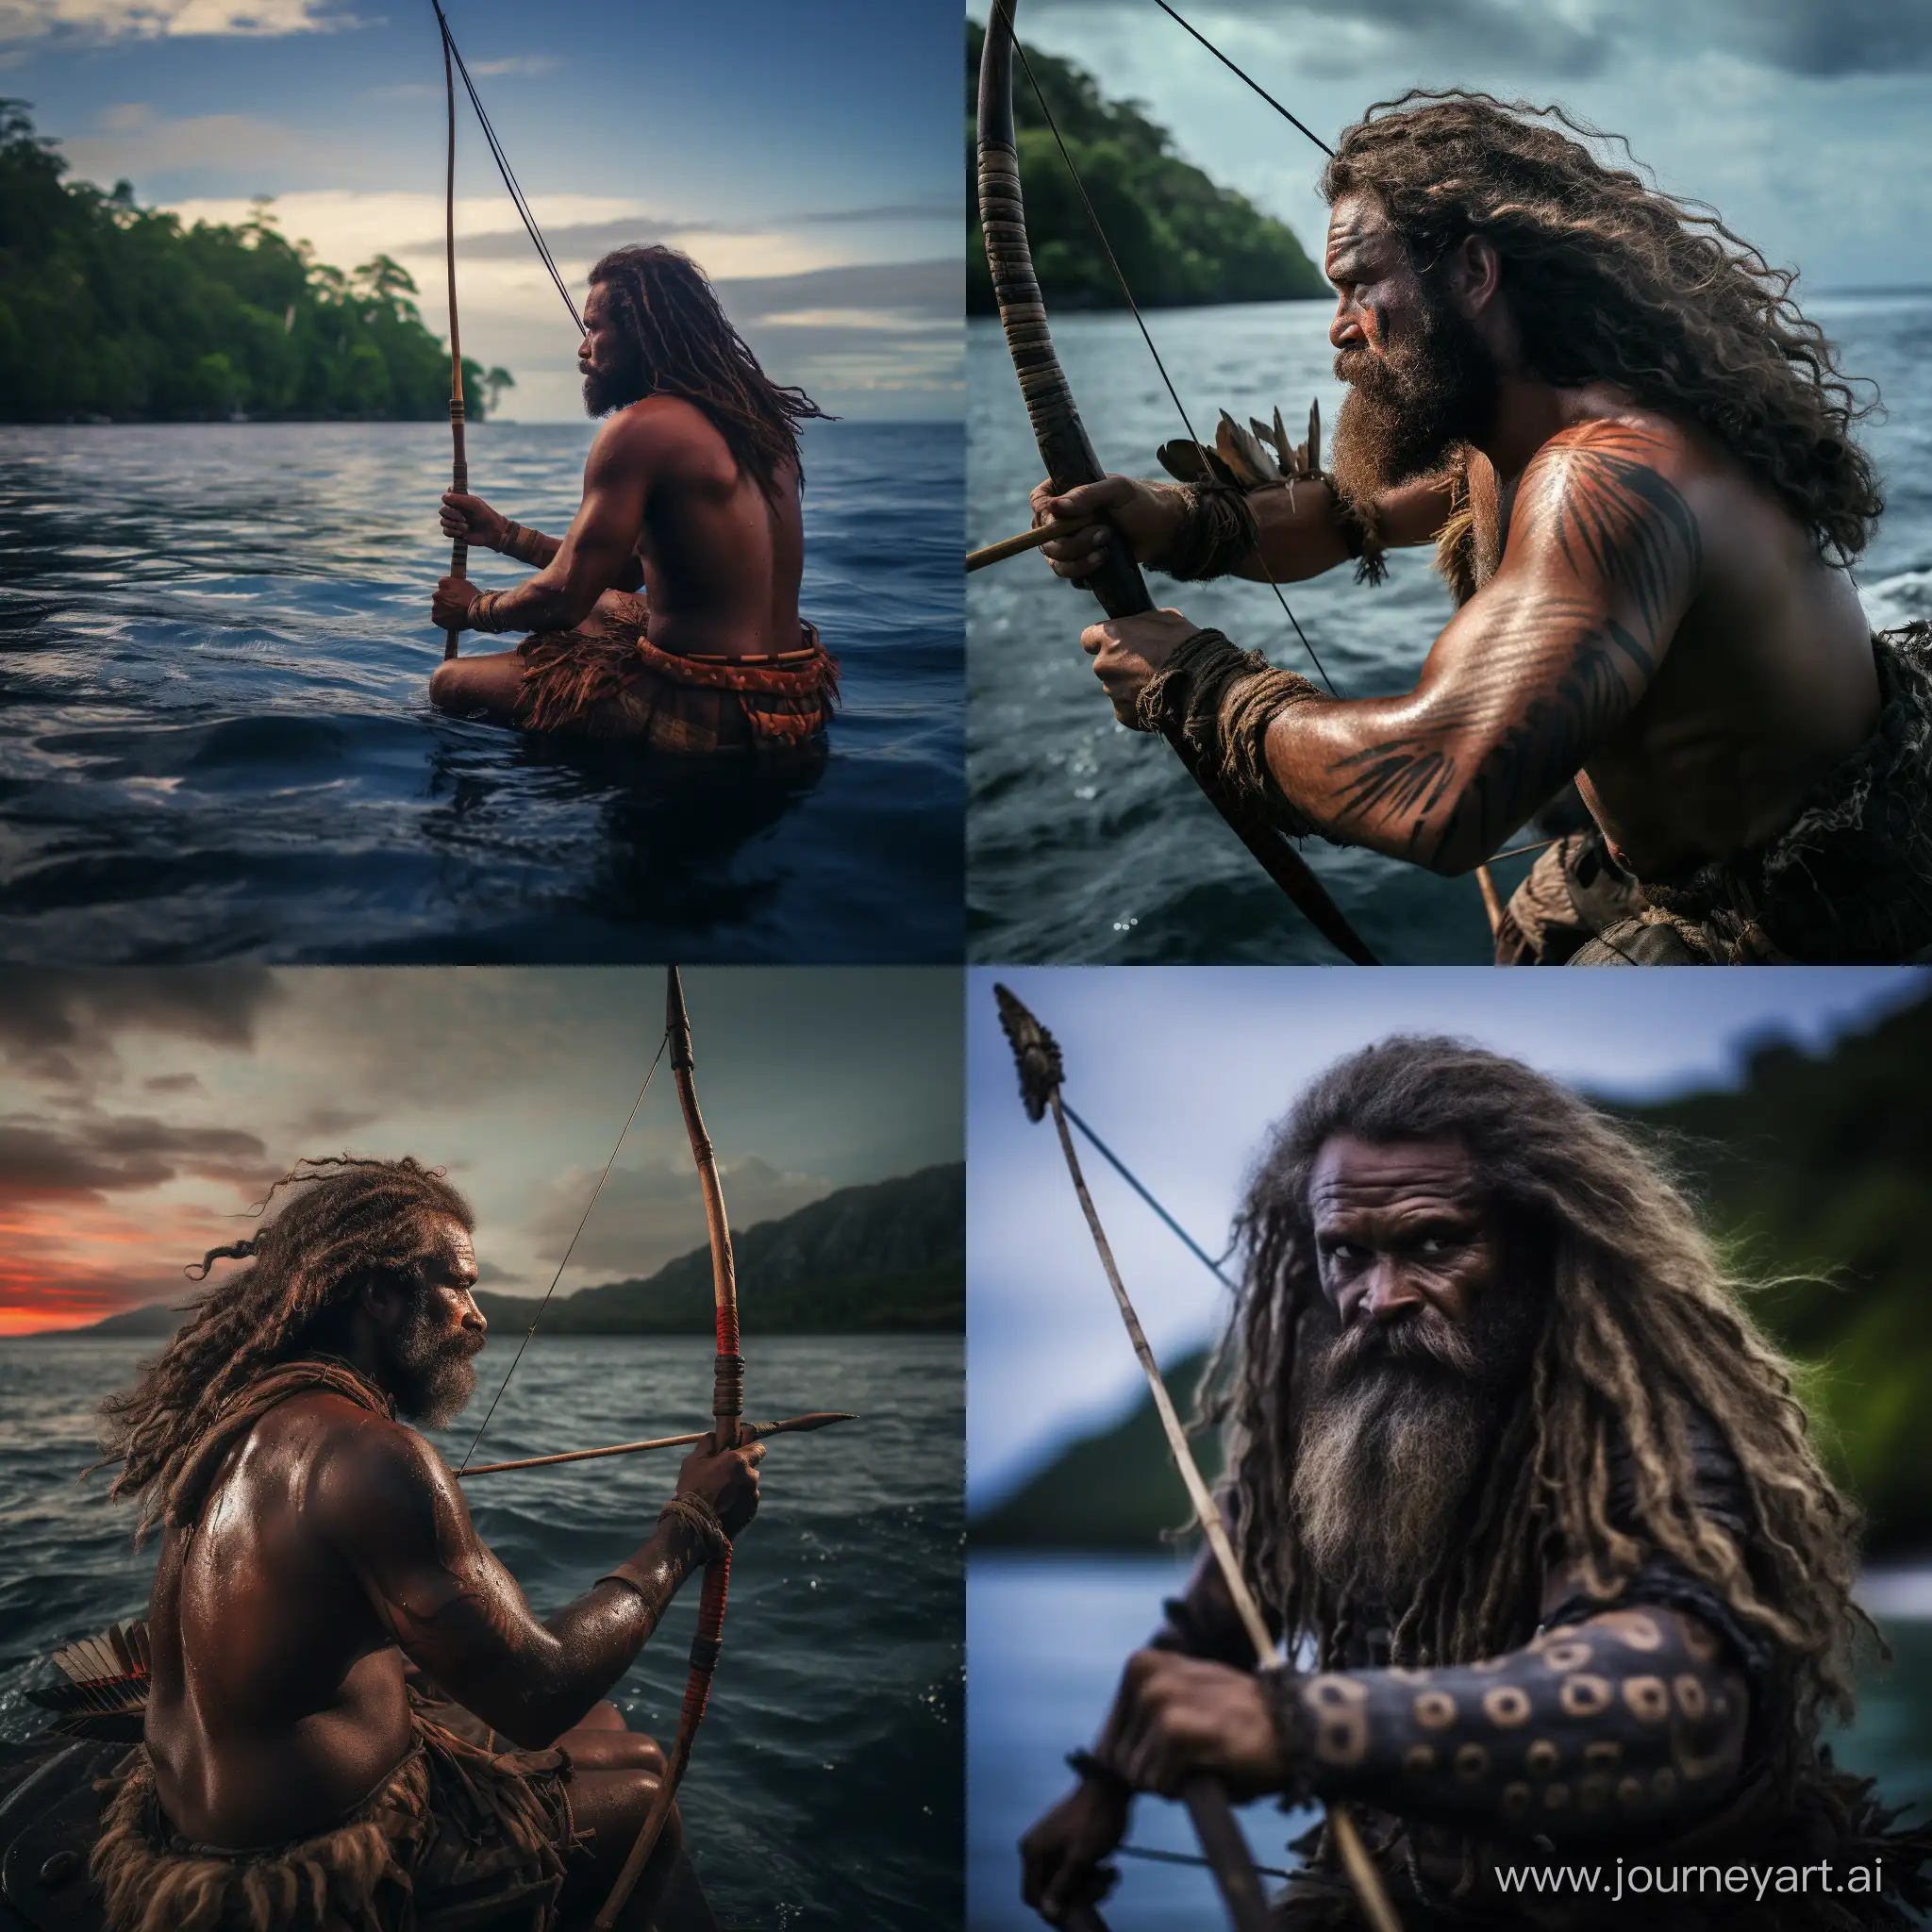 Cinematic image of a man in vanuatu with his bow arrow hunting in the sea